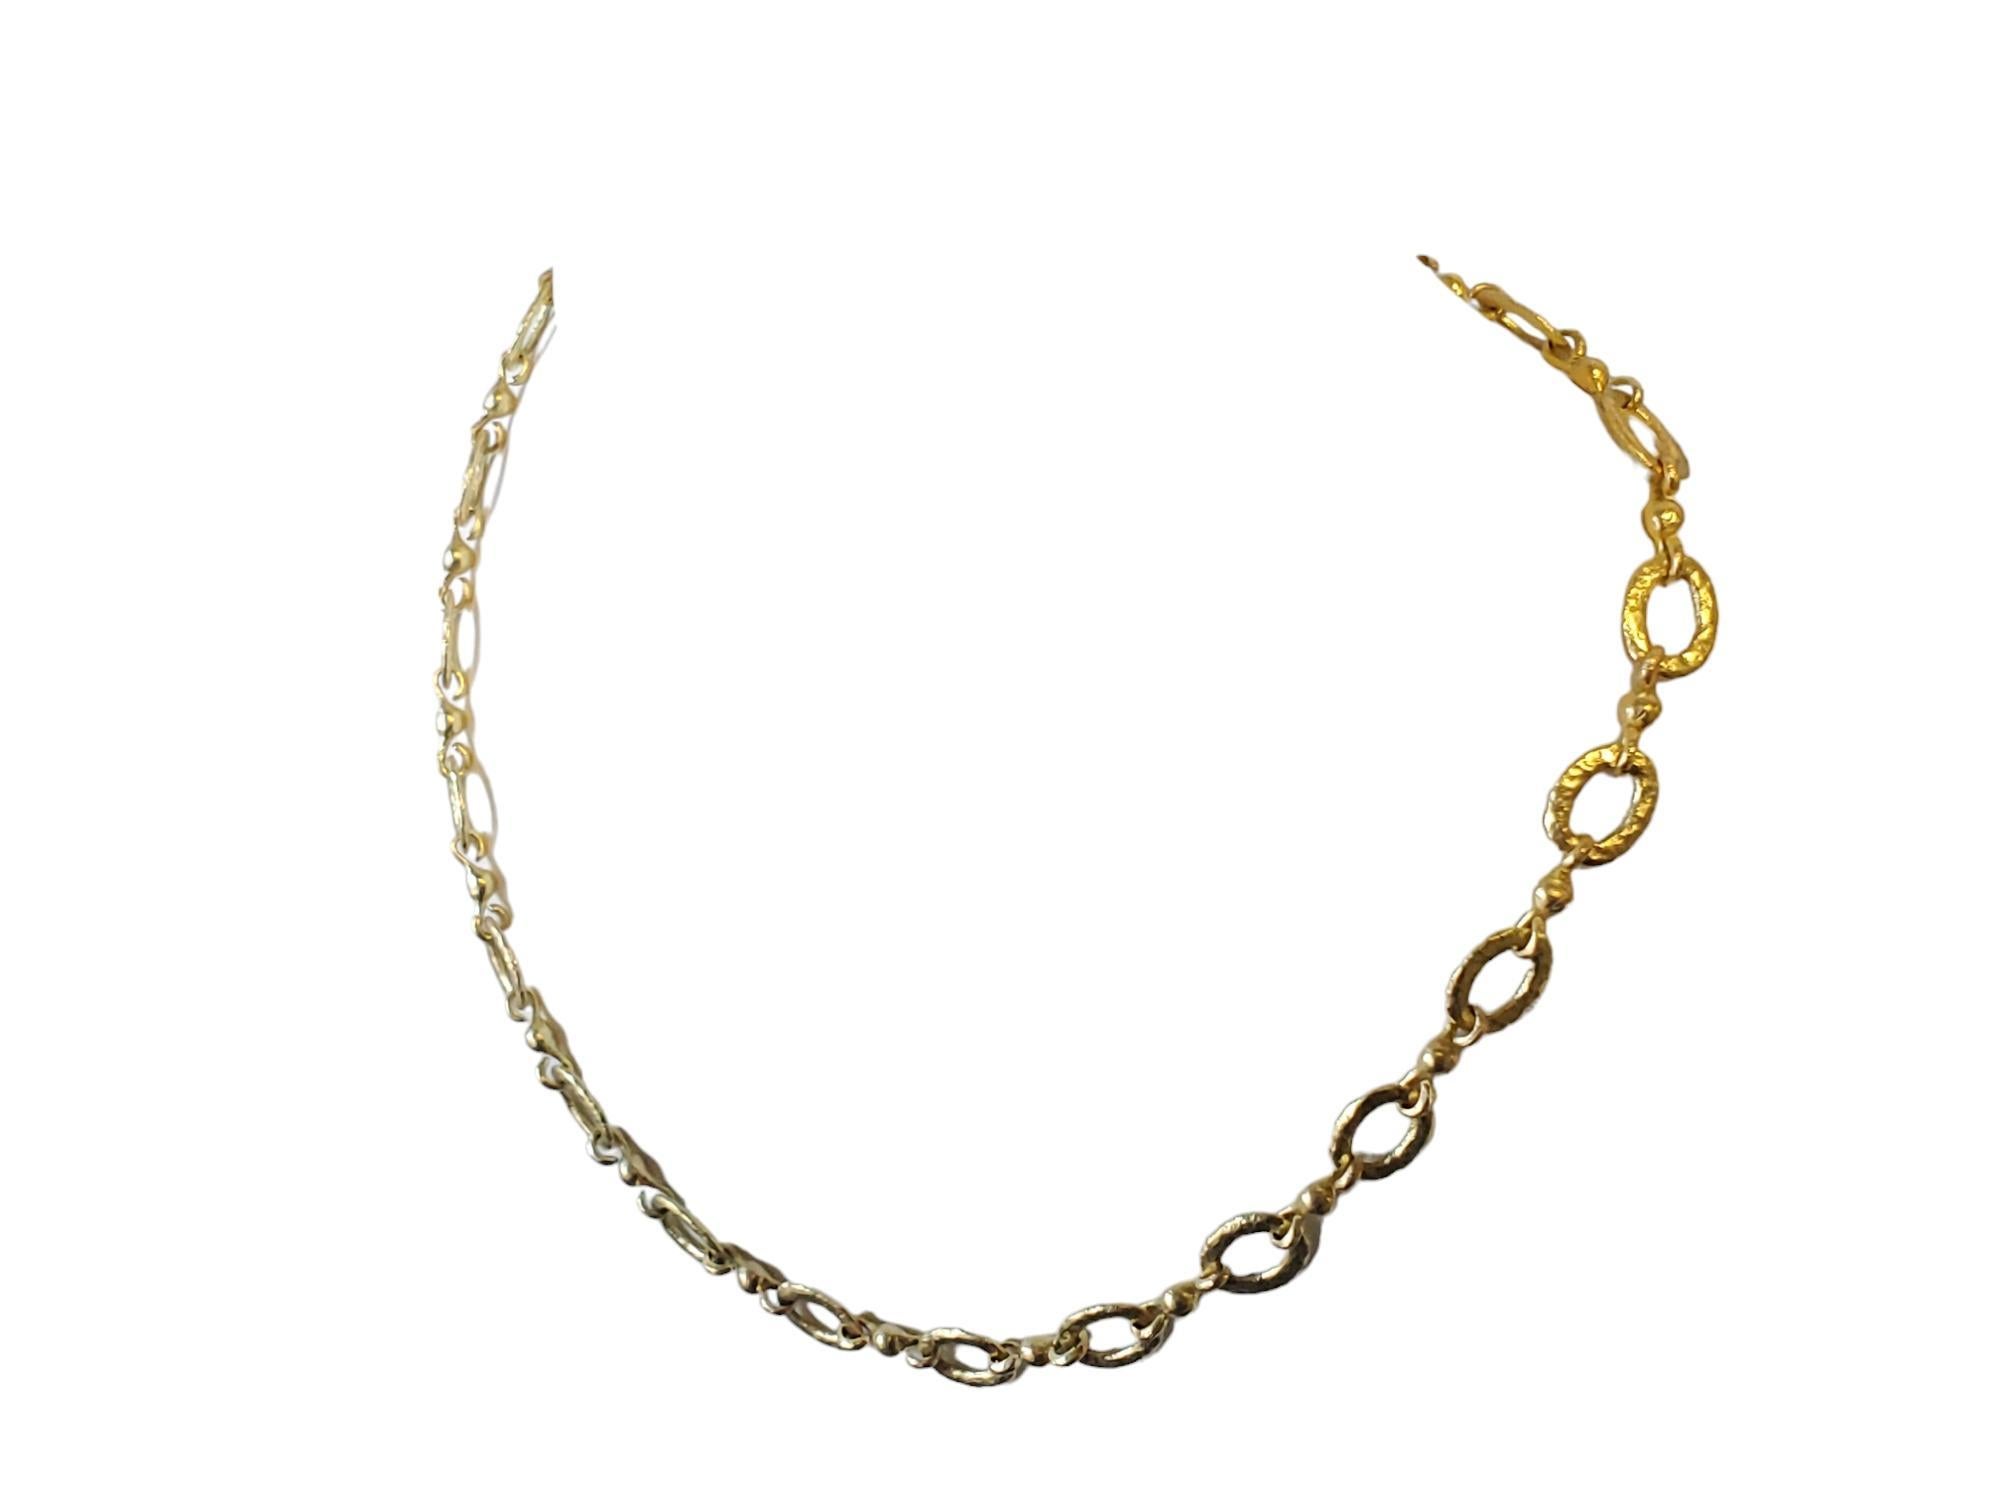 Estate Fine Gold Chain 18k Hammered Gold Link Necklace Toggle Clasp In Good Condition For Sale In Overland Park, KS